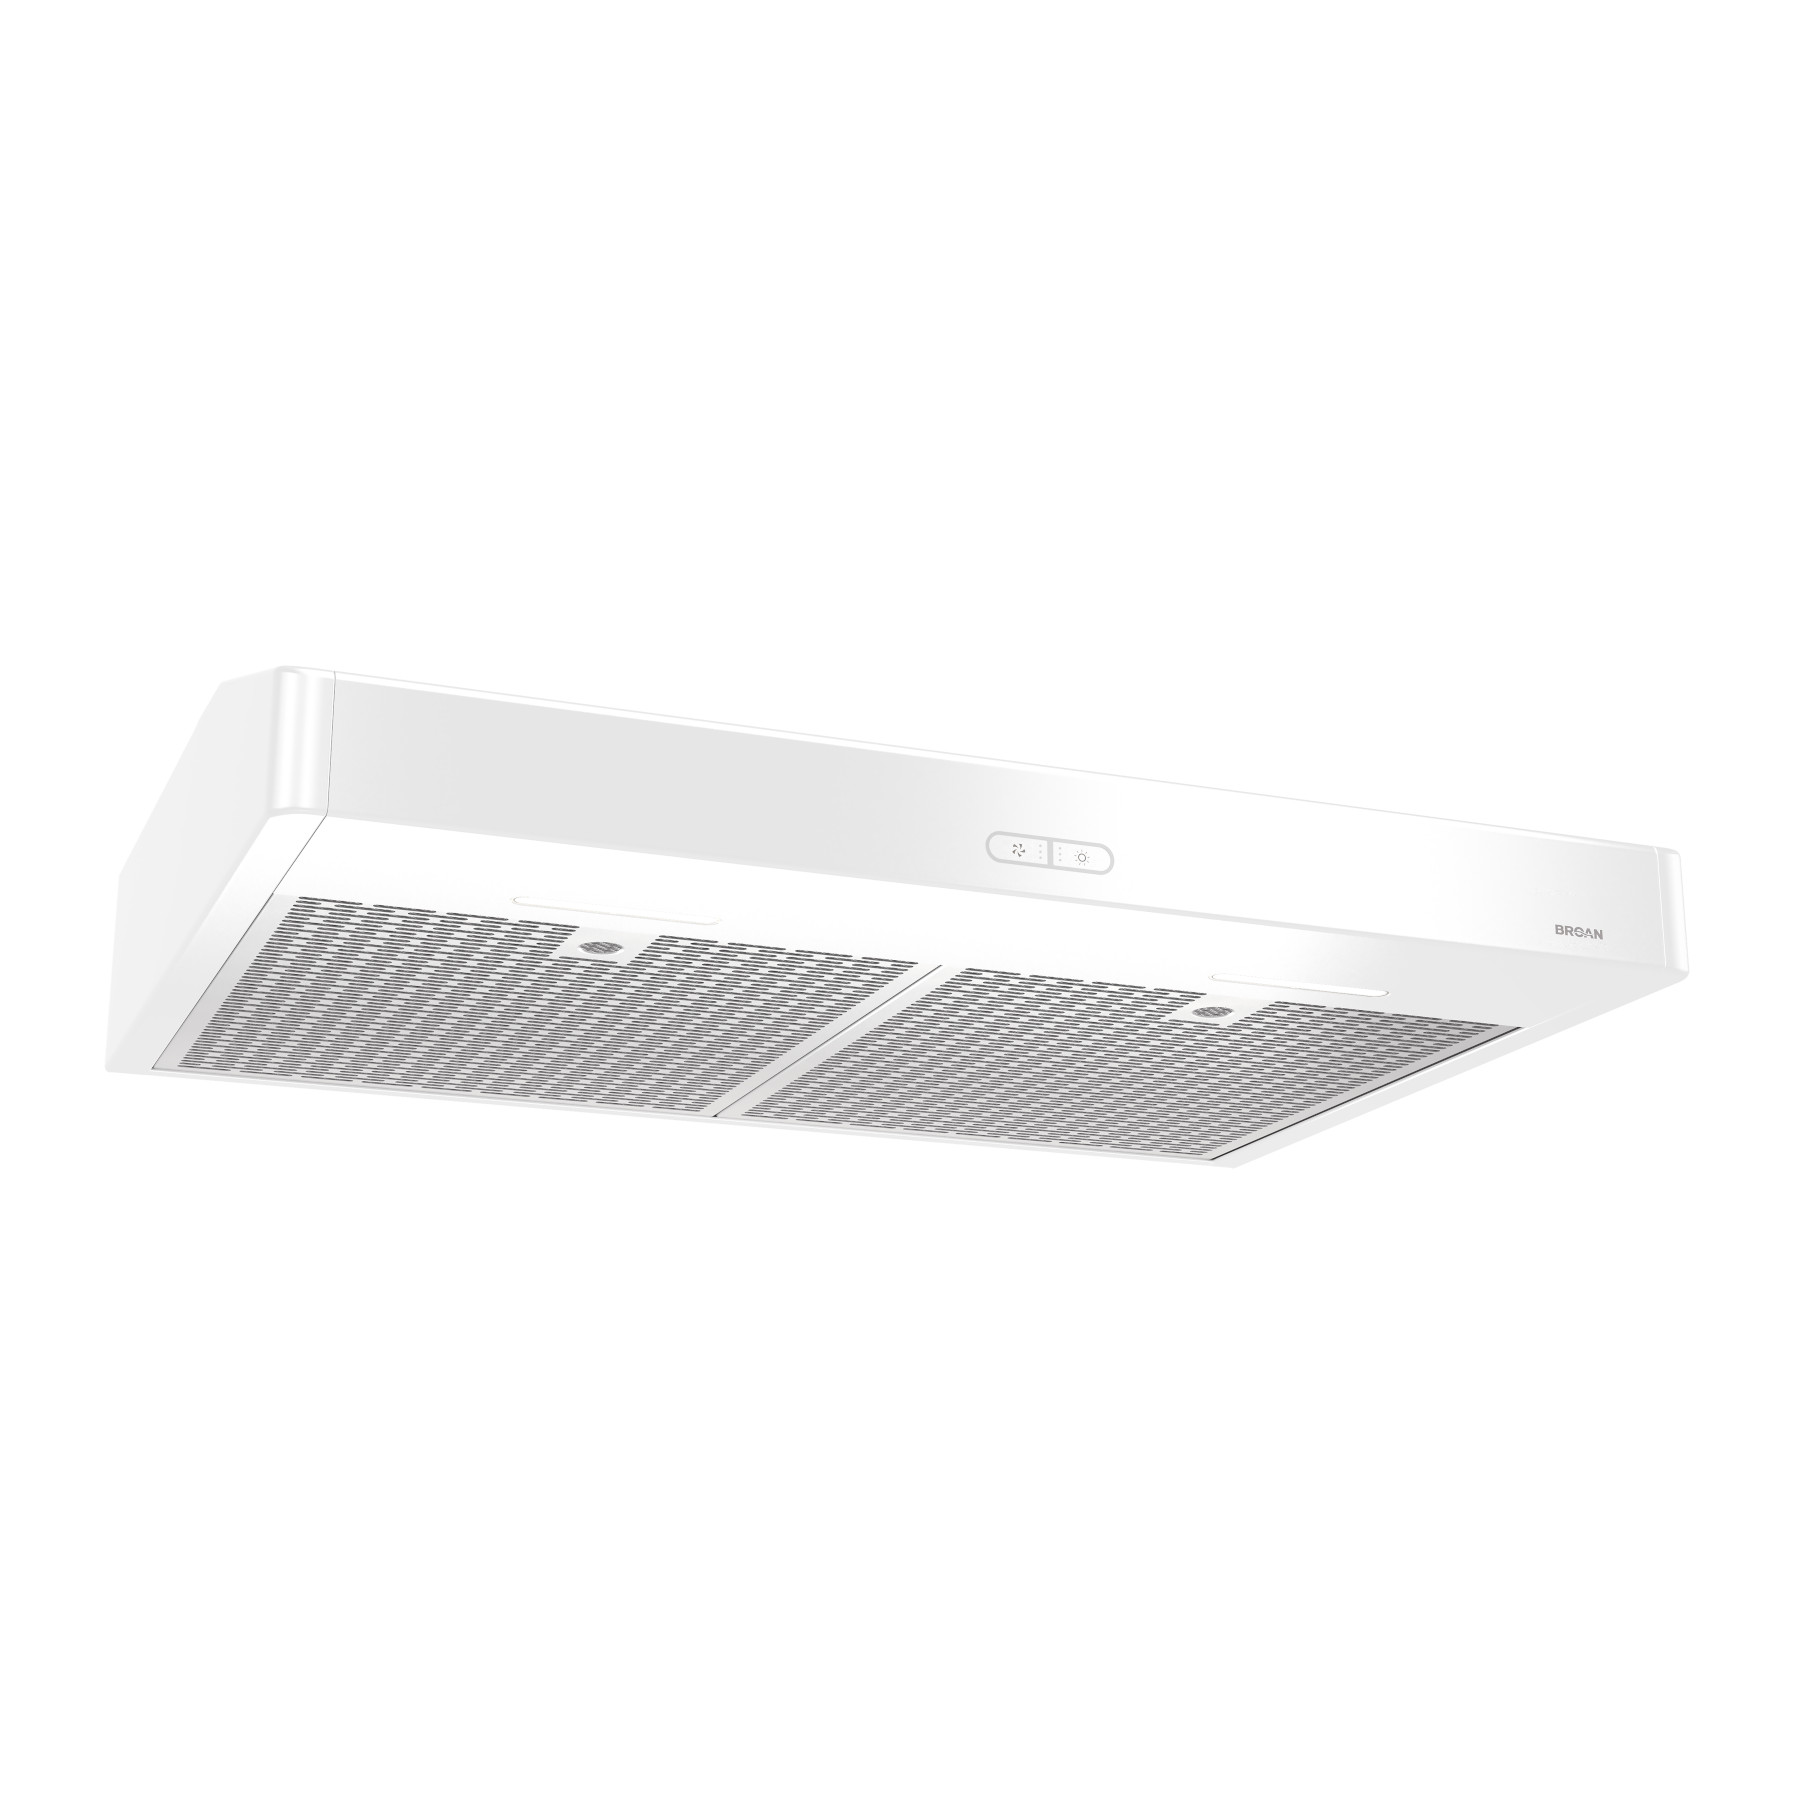 Broan BCSD124WW 24 Inch Under Cabinet Range Hood with 2-Speed/250 CFM  Blower, Rocker Switch Control, Halogen Lighting, Open Mesh Filters, Captur™  System, EZ1 System, ADA Compliant, UL Listed, and HVI-2100 Certified: White